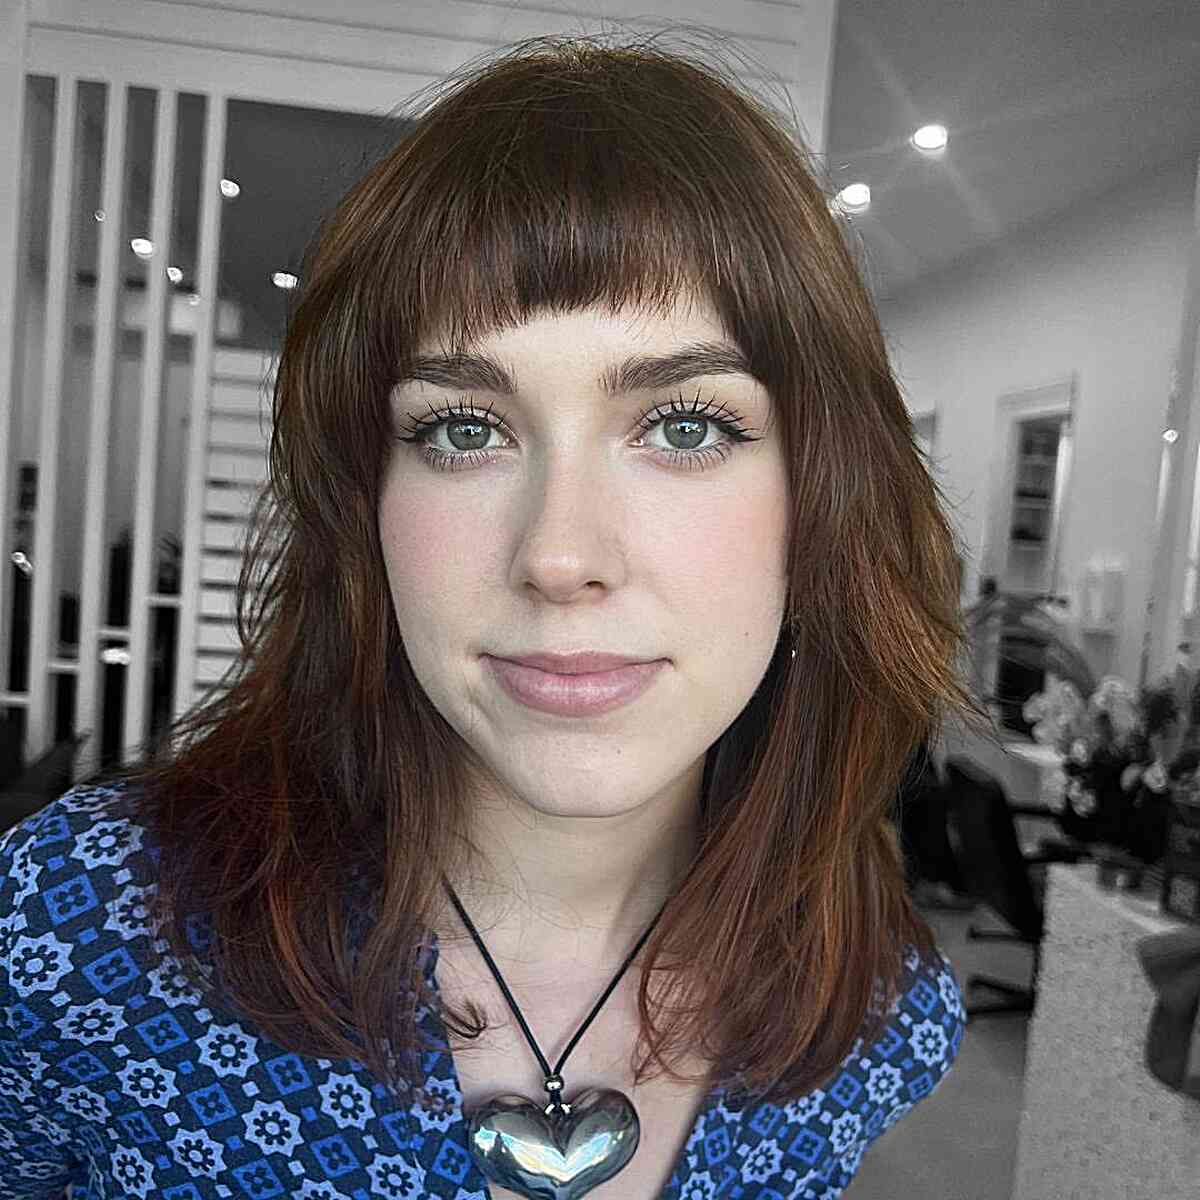 Layered bob with blunt bangs